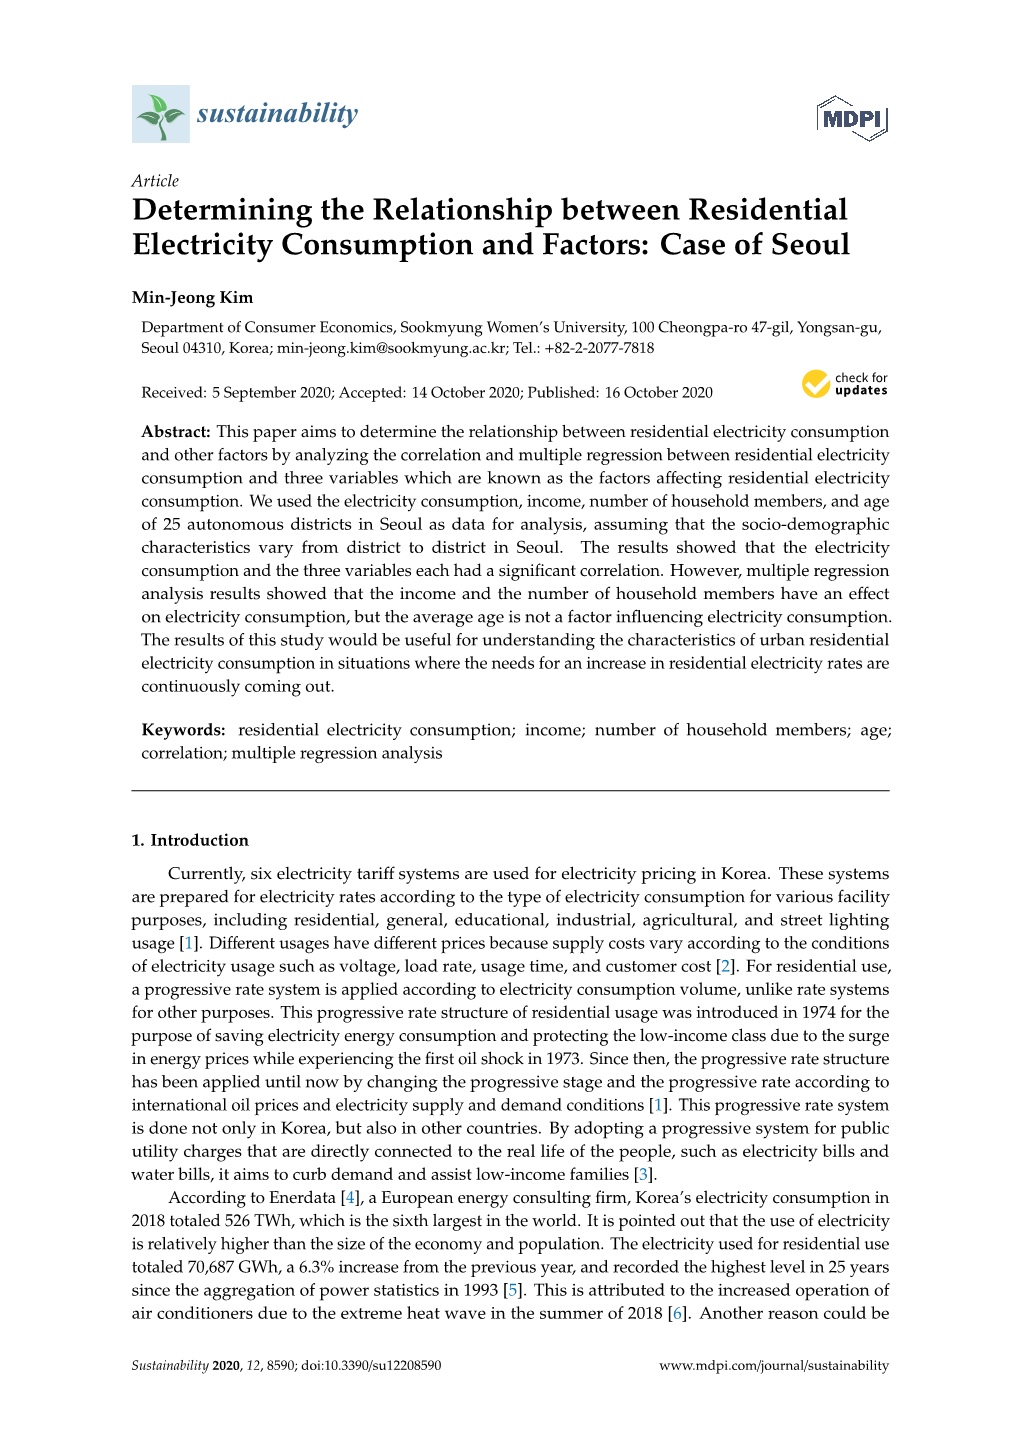 Determining the Relationship Between Residential Electricity Consumption and Factors: Case of Seoul